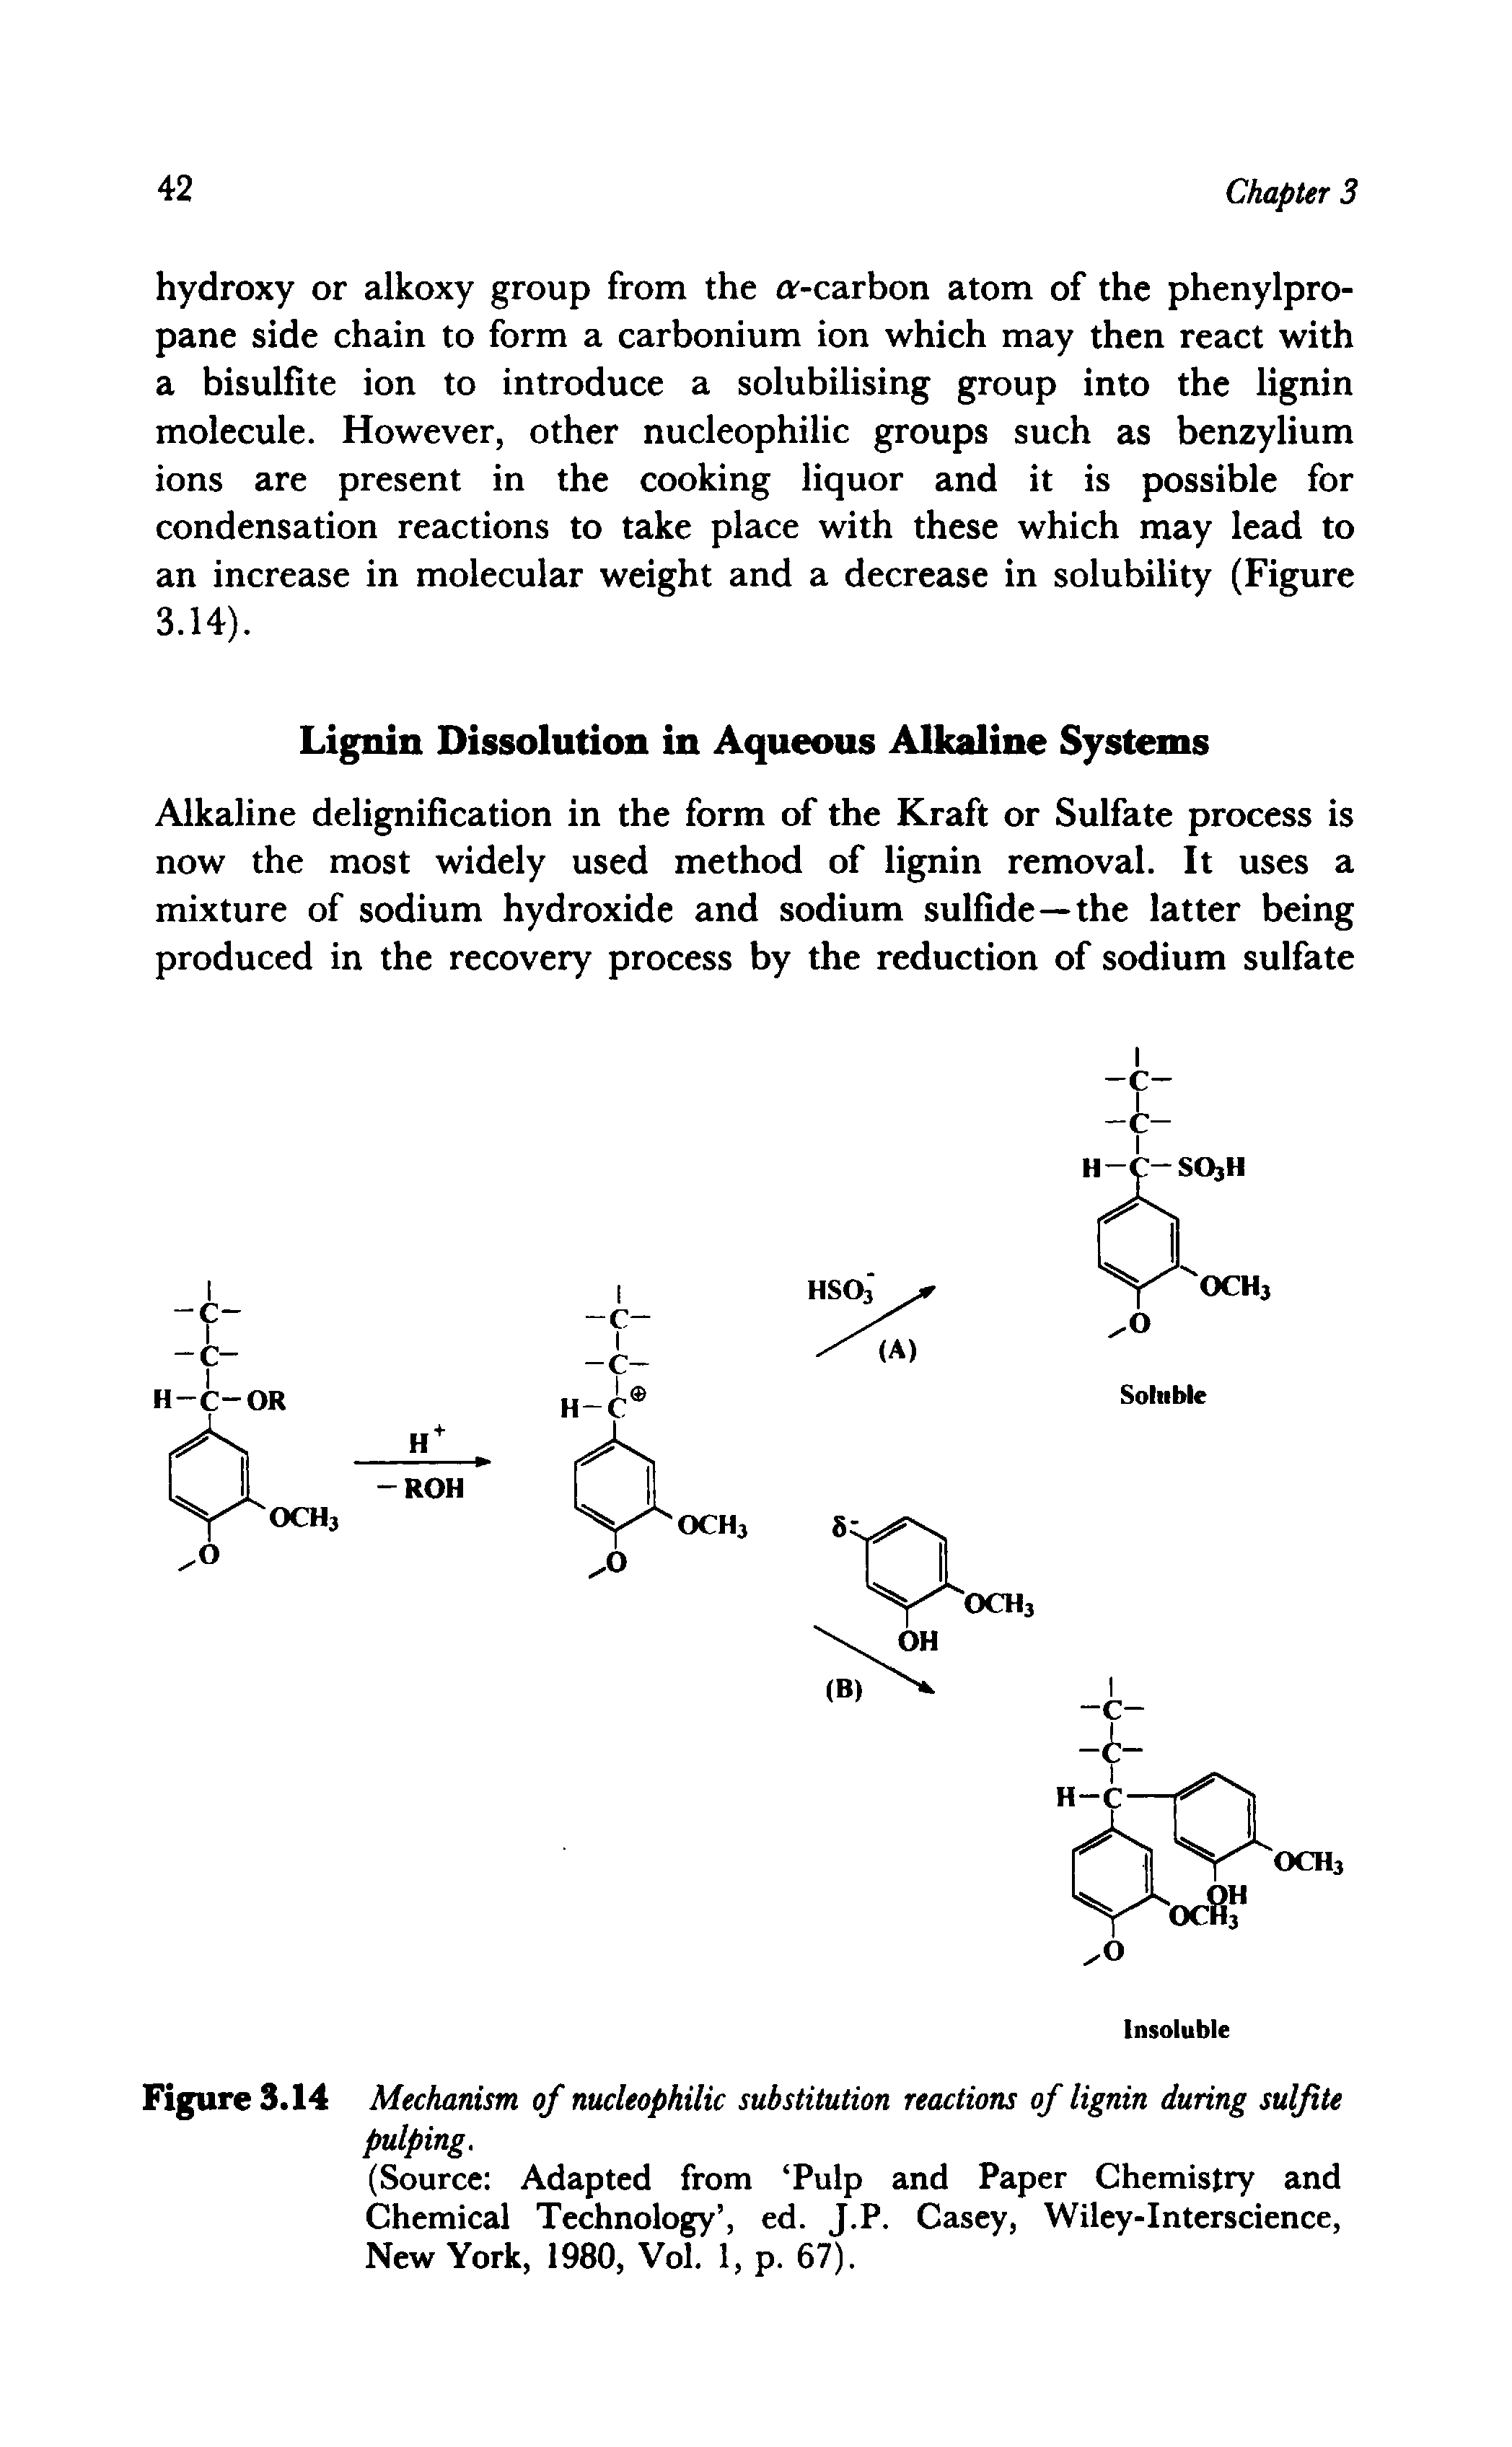 Figure 3.14 Mechanism of nucleophilic substitution reactions of lignin during sulfite pulping.